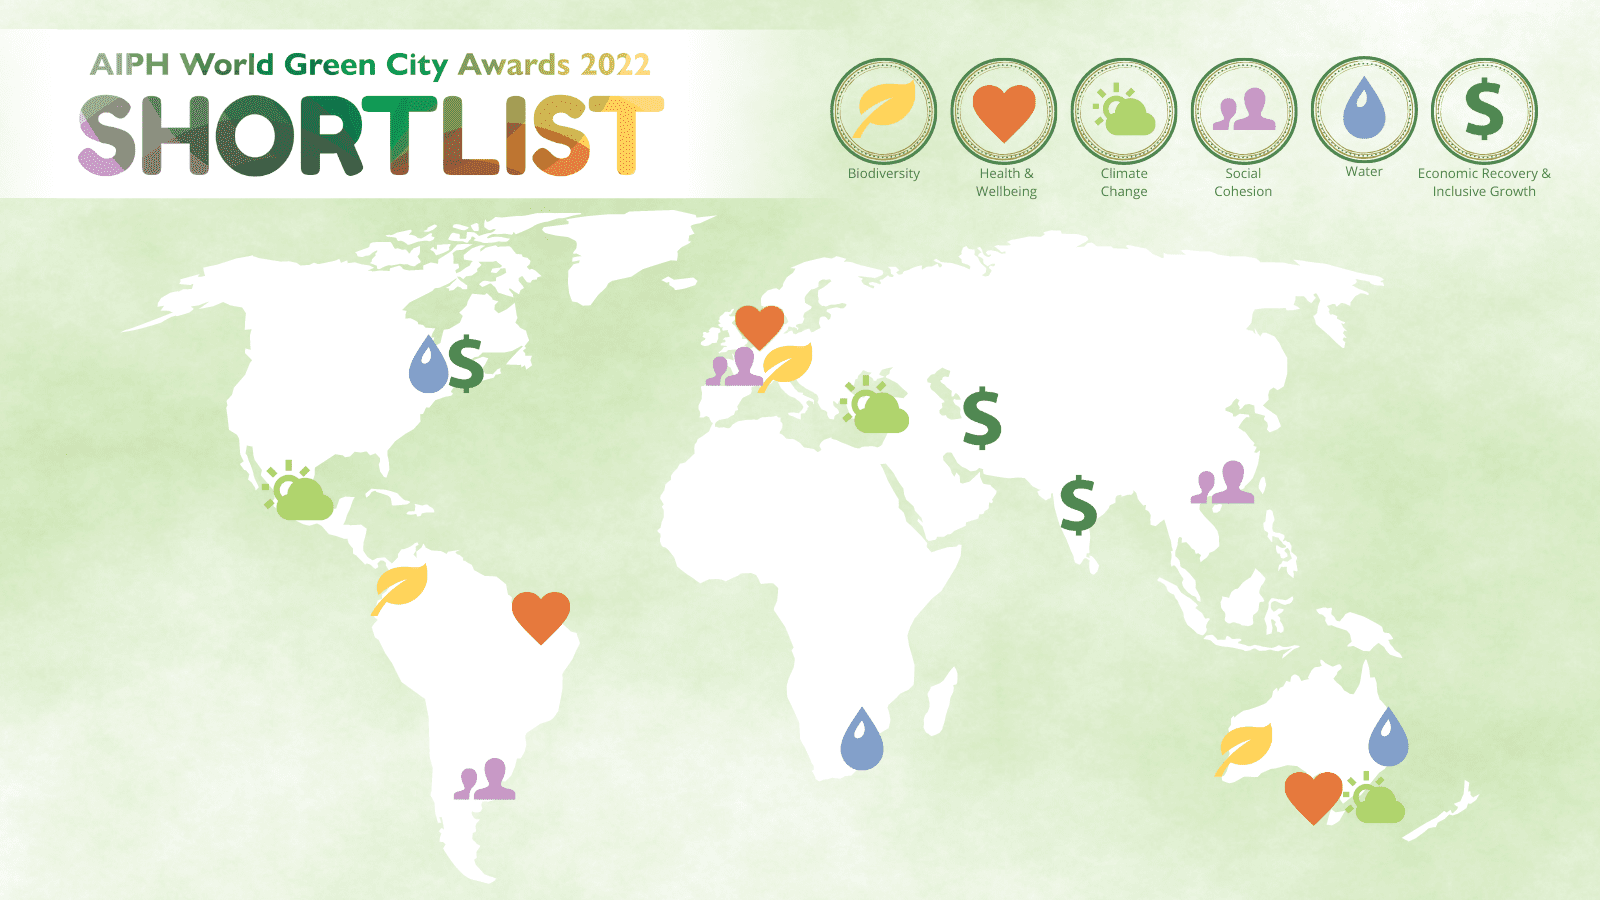 A map of the shortlisted entries for the AIPH World Green City Awards 2022